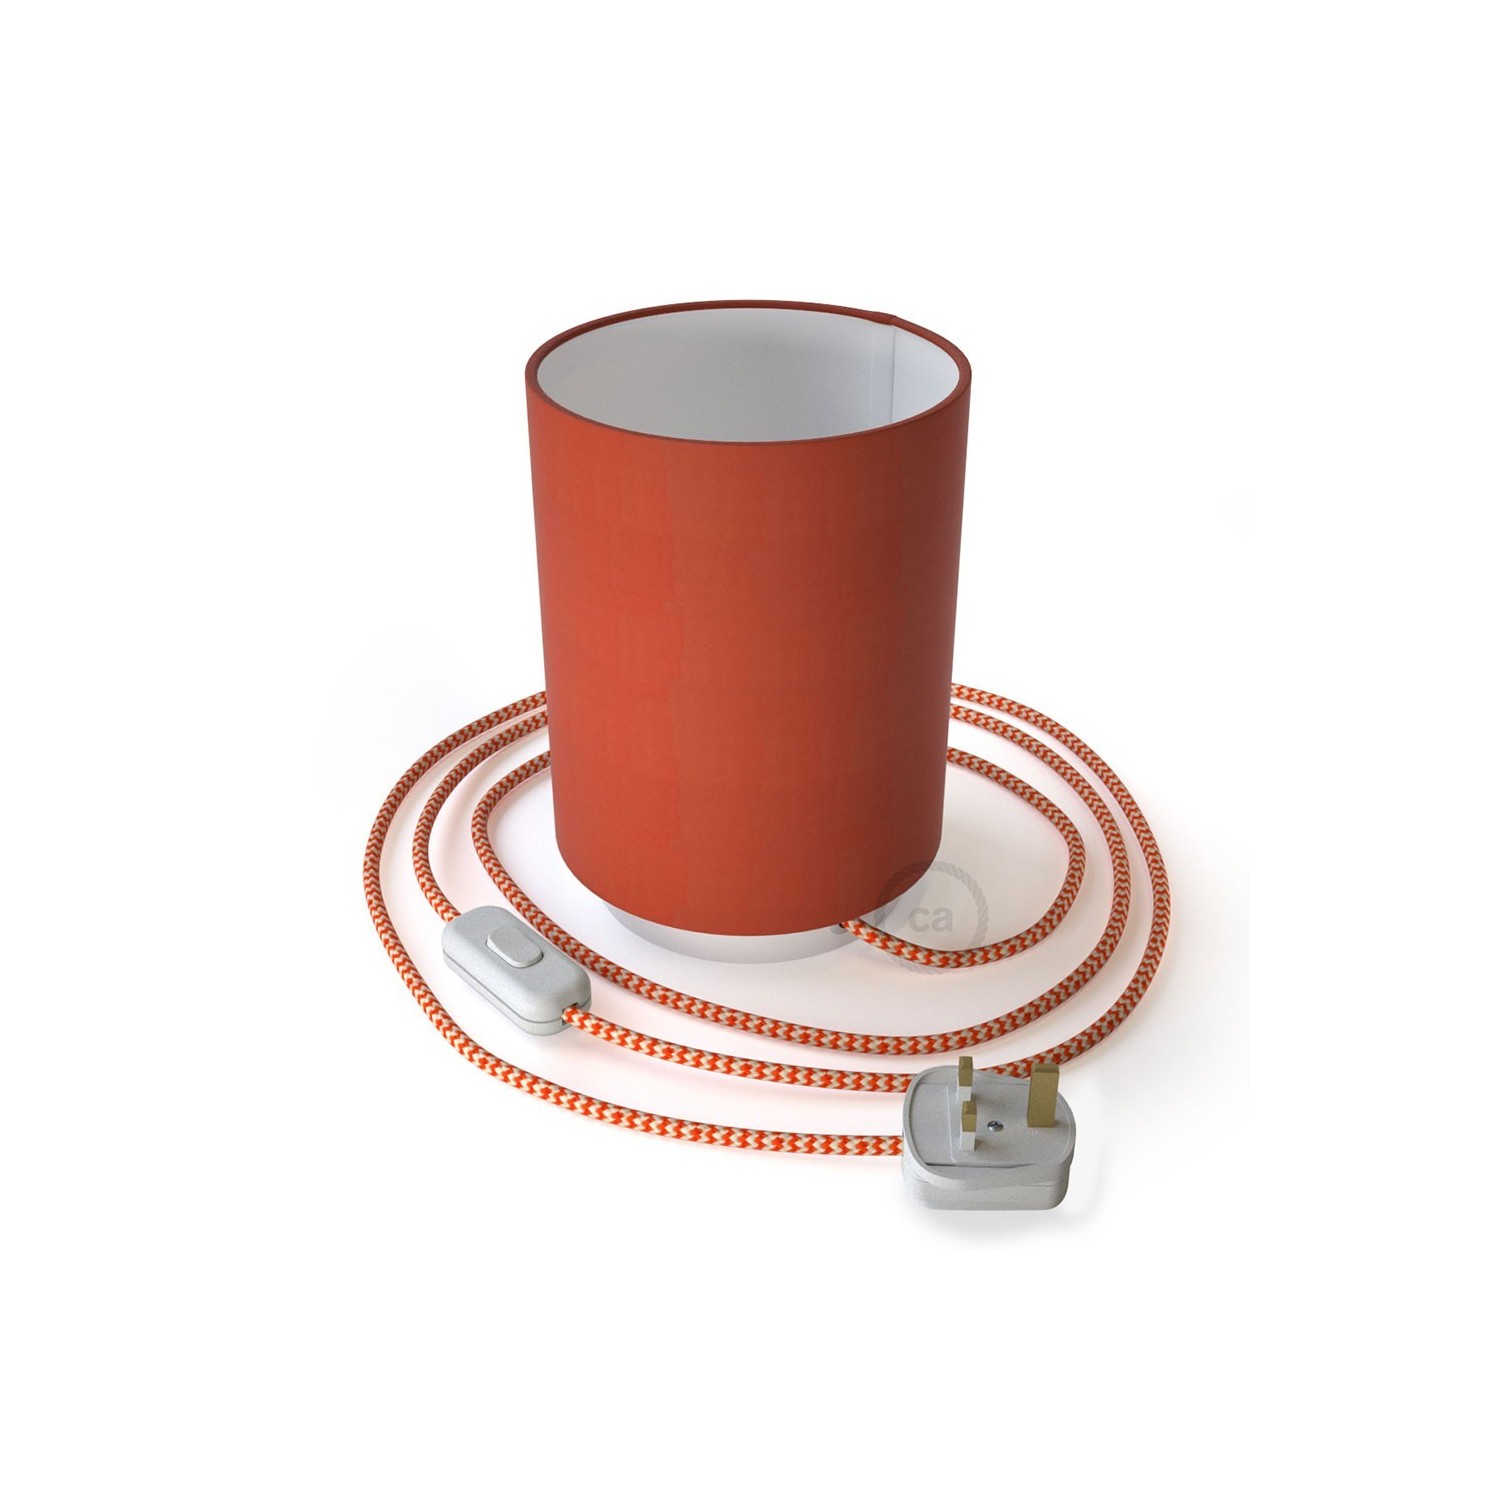 Posaluce in metal with Lobster Cinette Cilindro lampshade, complete with fabric cable, switch and UK plug